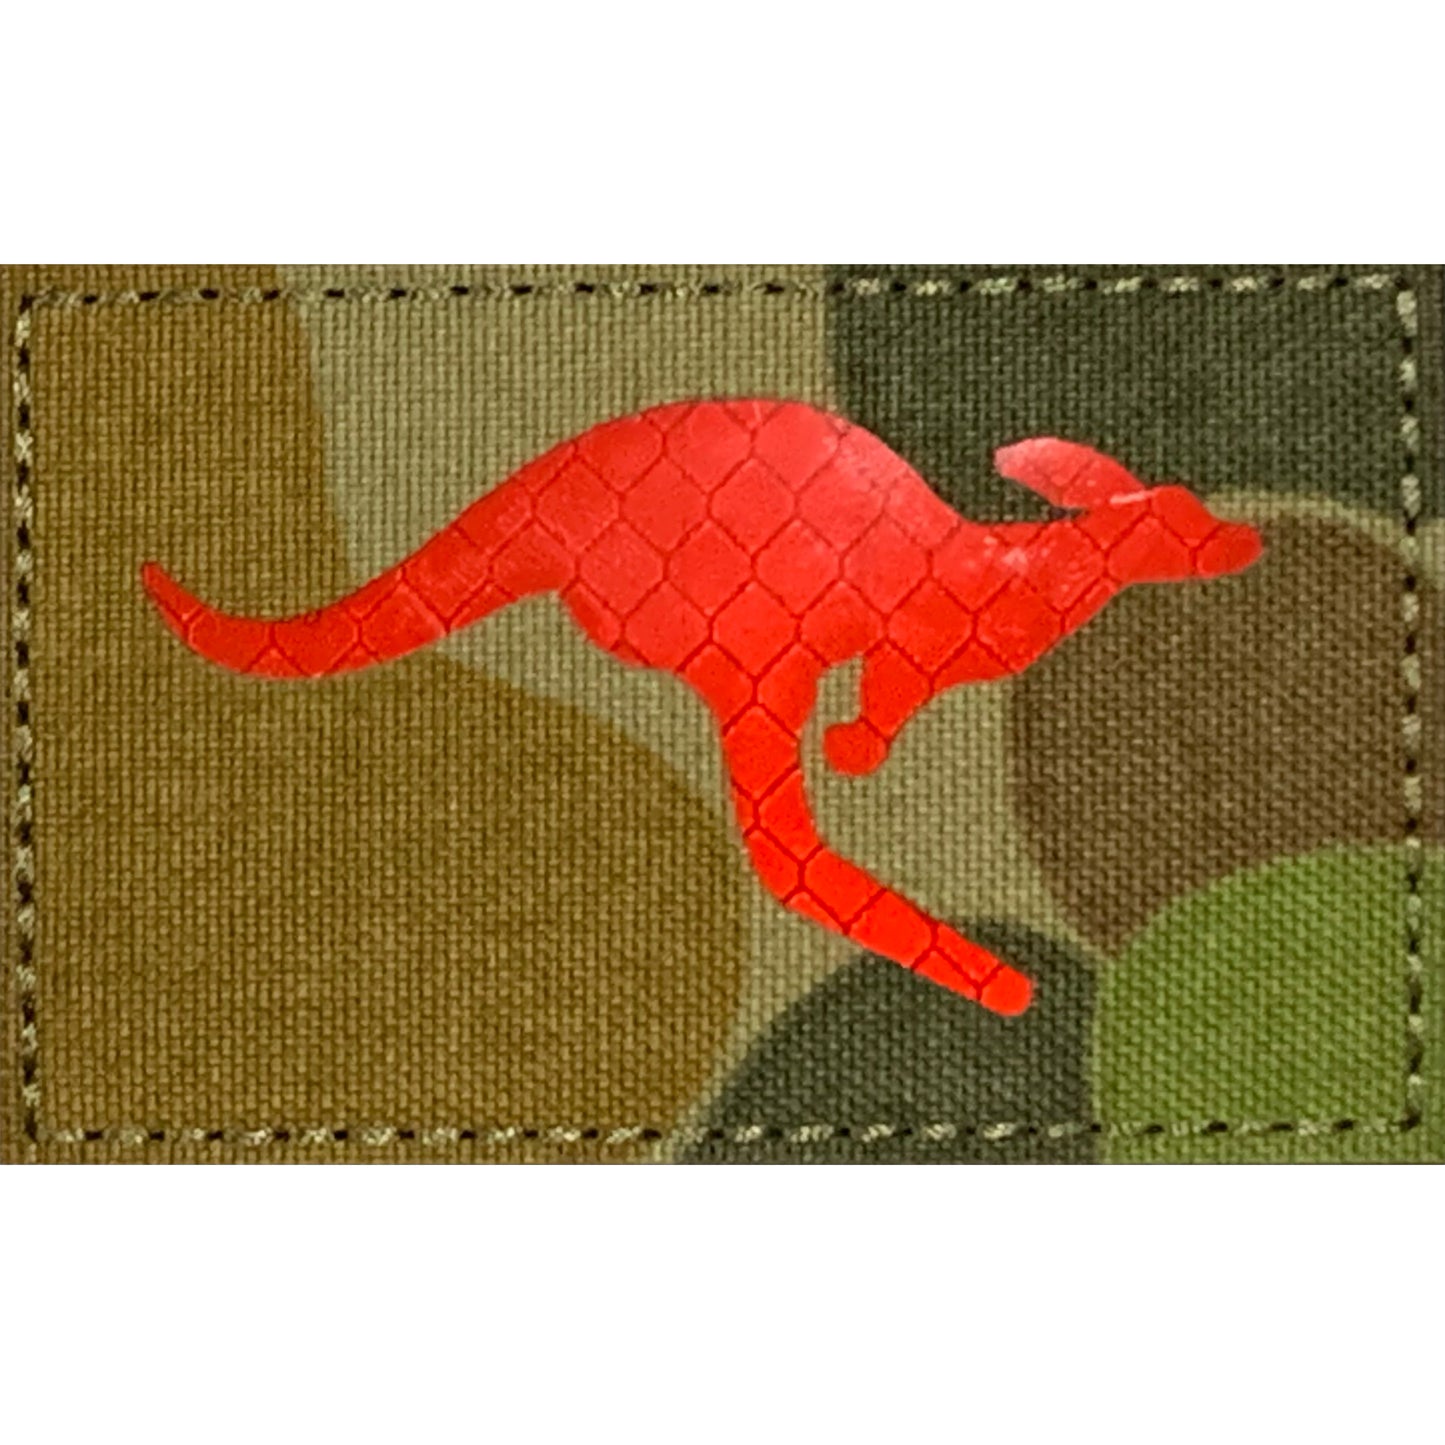  Australian Army Kangaroo Patch Recon Reflective IR  Velcro Backed  Size: 8cm x 5cm  Hook and Loop included